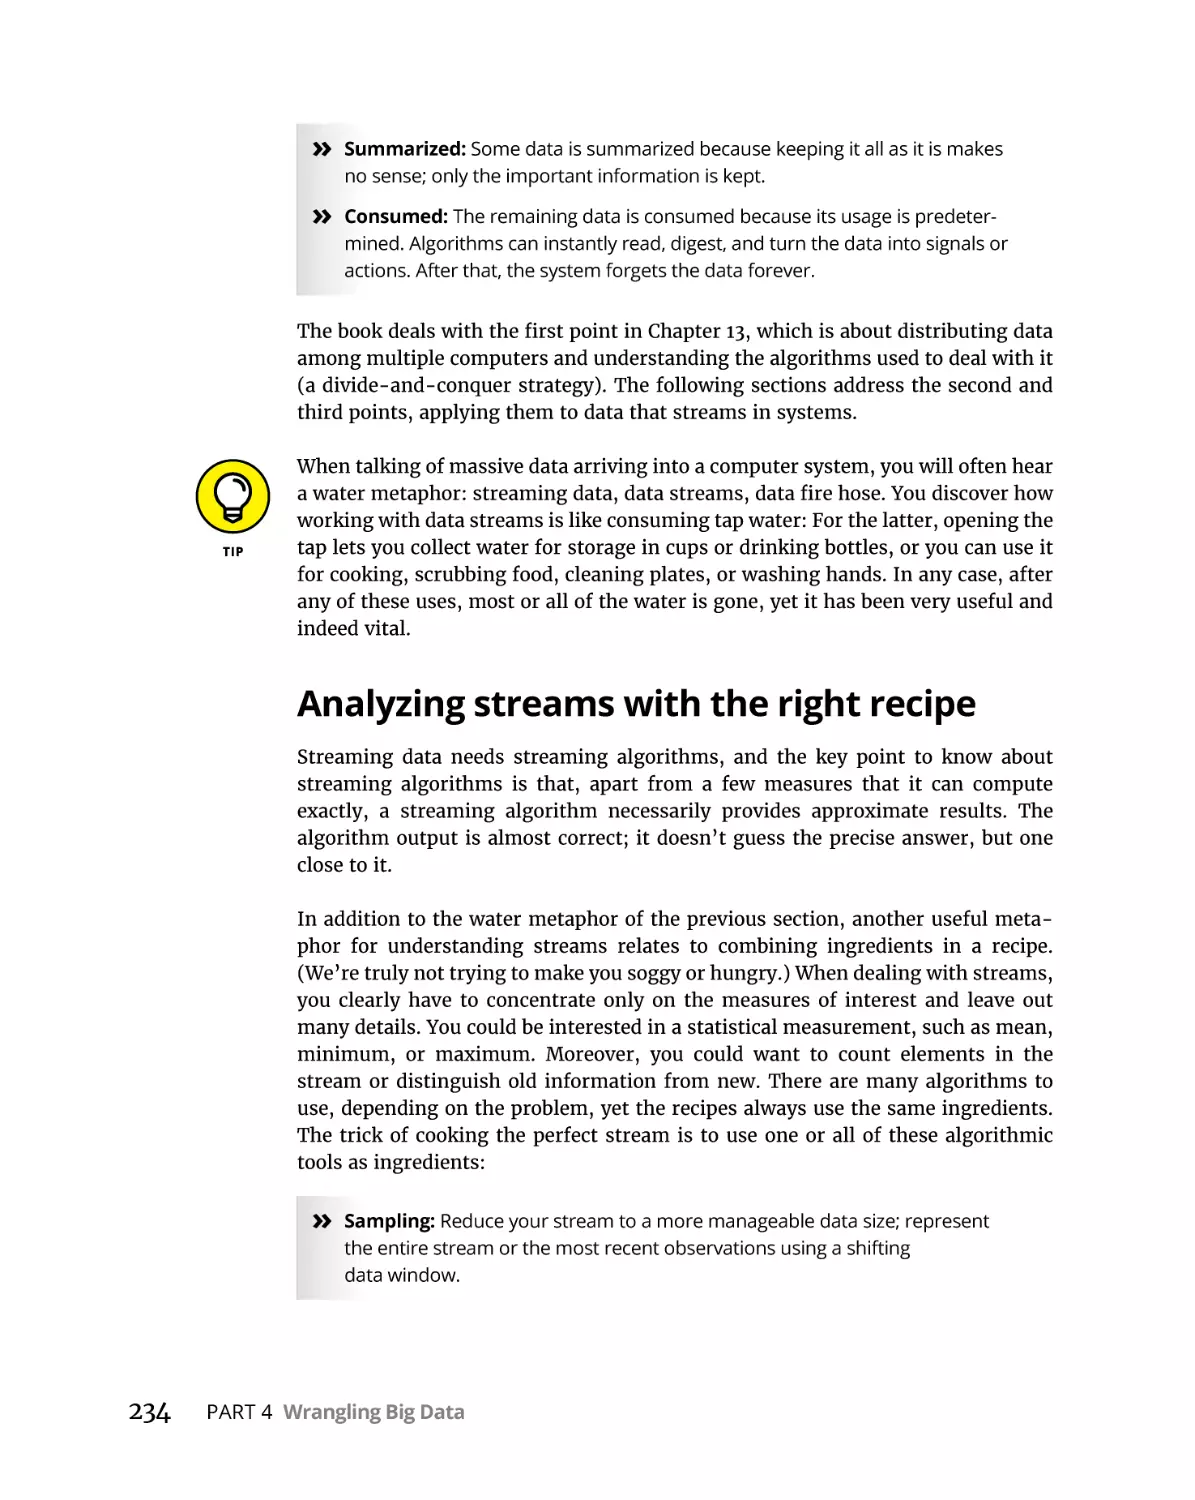 Analyzing streams with the right recipe